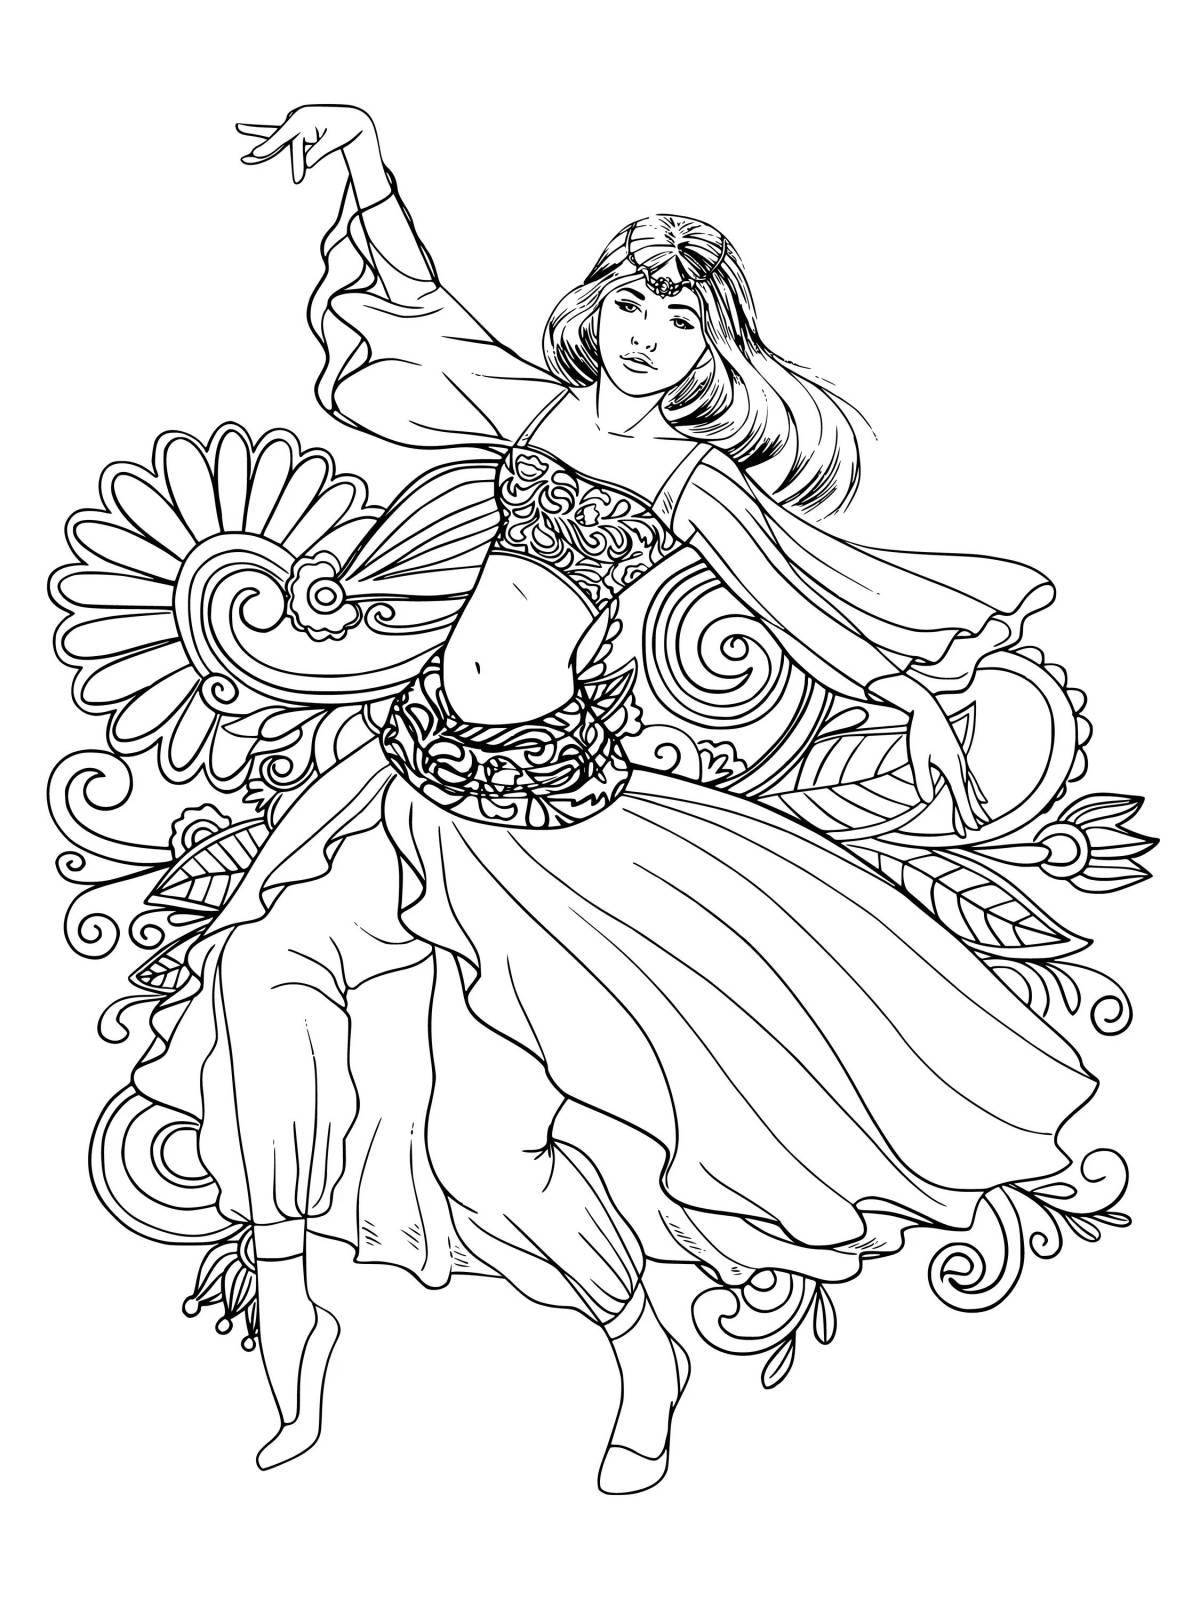 Playful gypsy coloring book